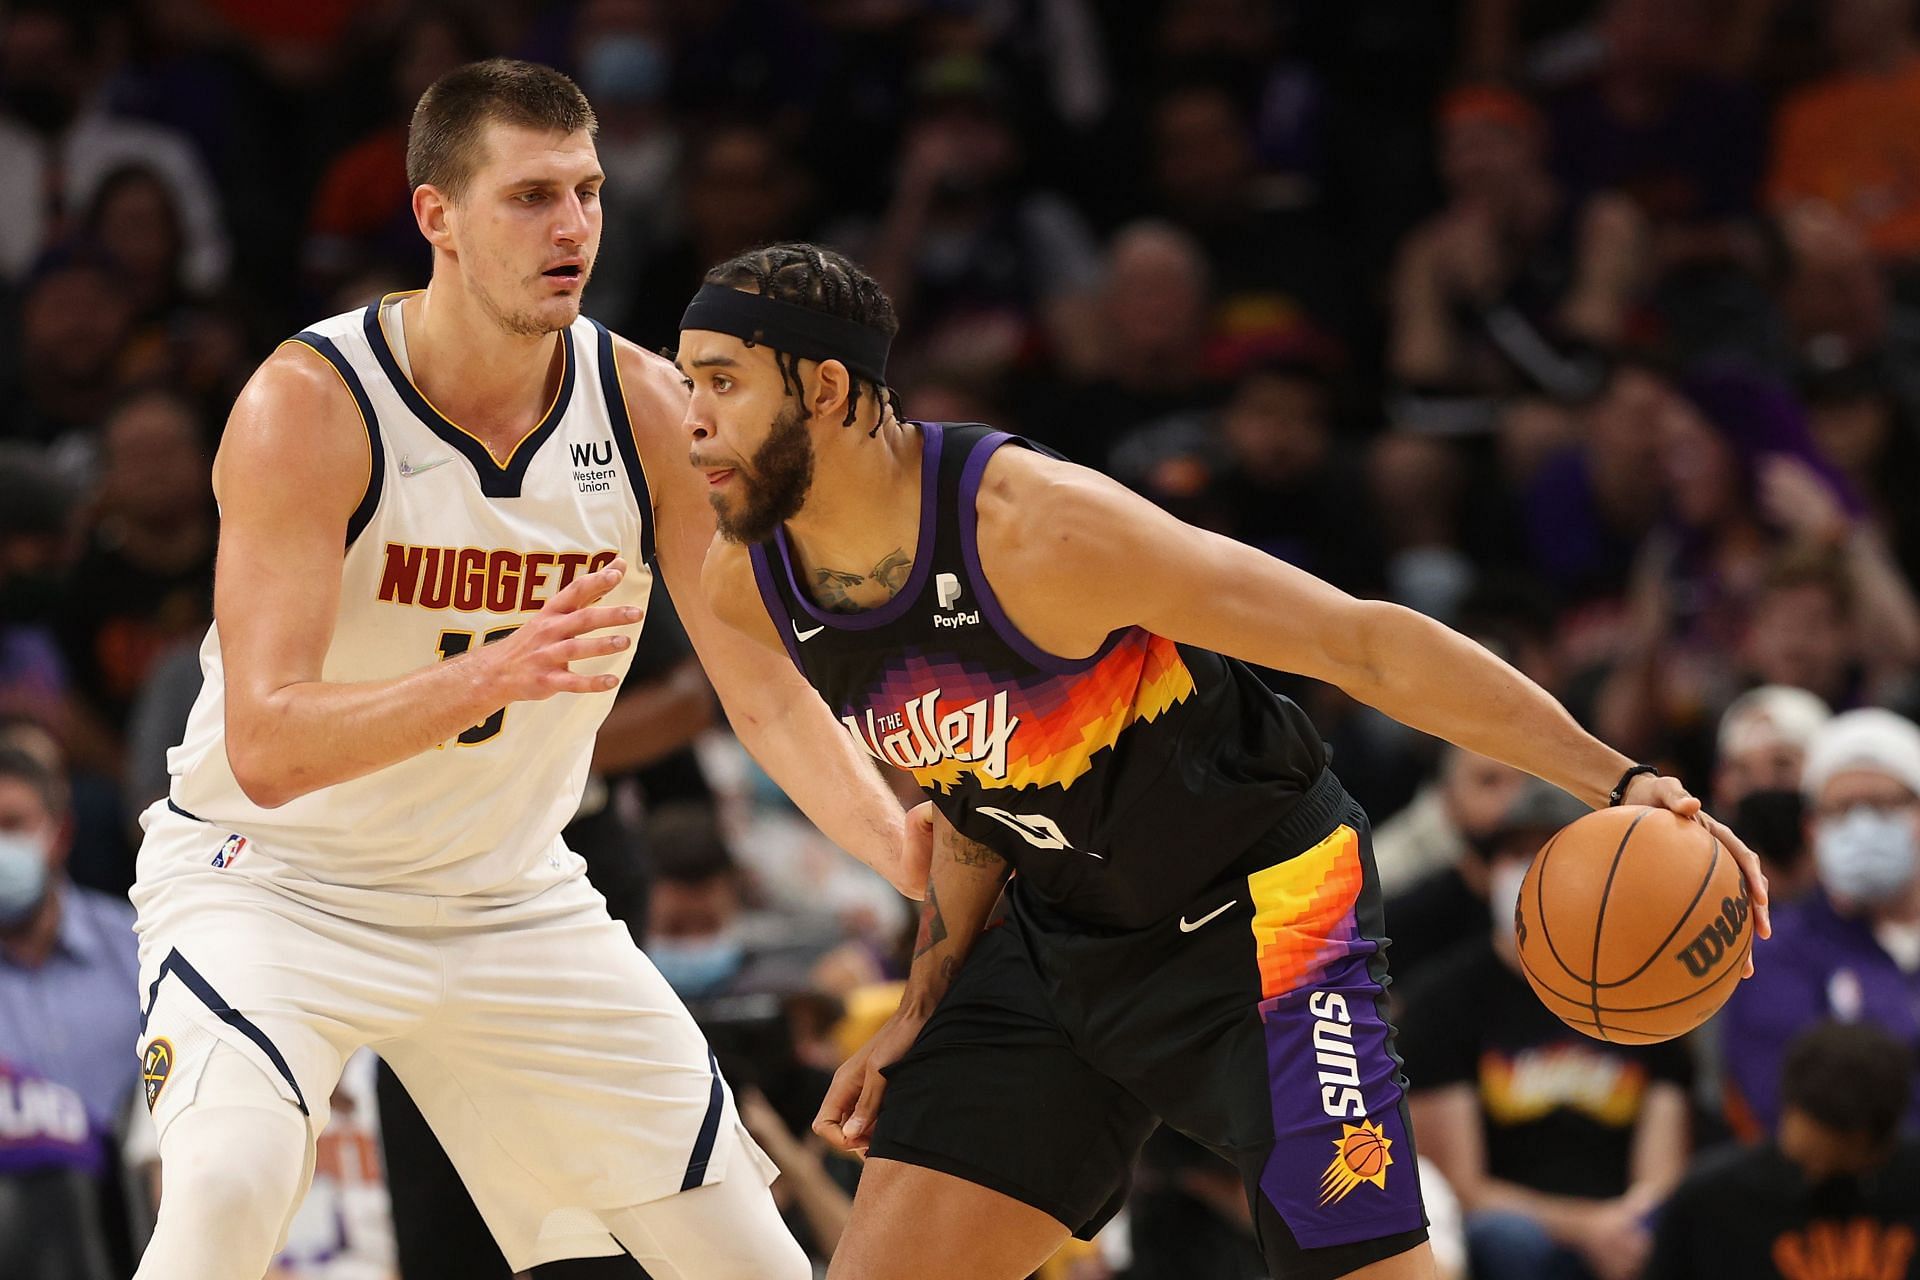 Nikola Jokic of the Denver Nuggets and JaVale McGee of the Phoenix Suns